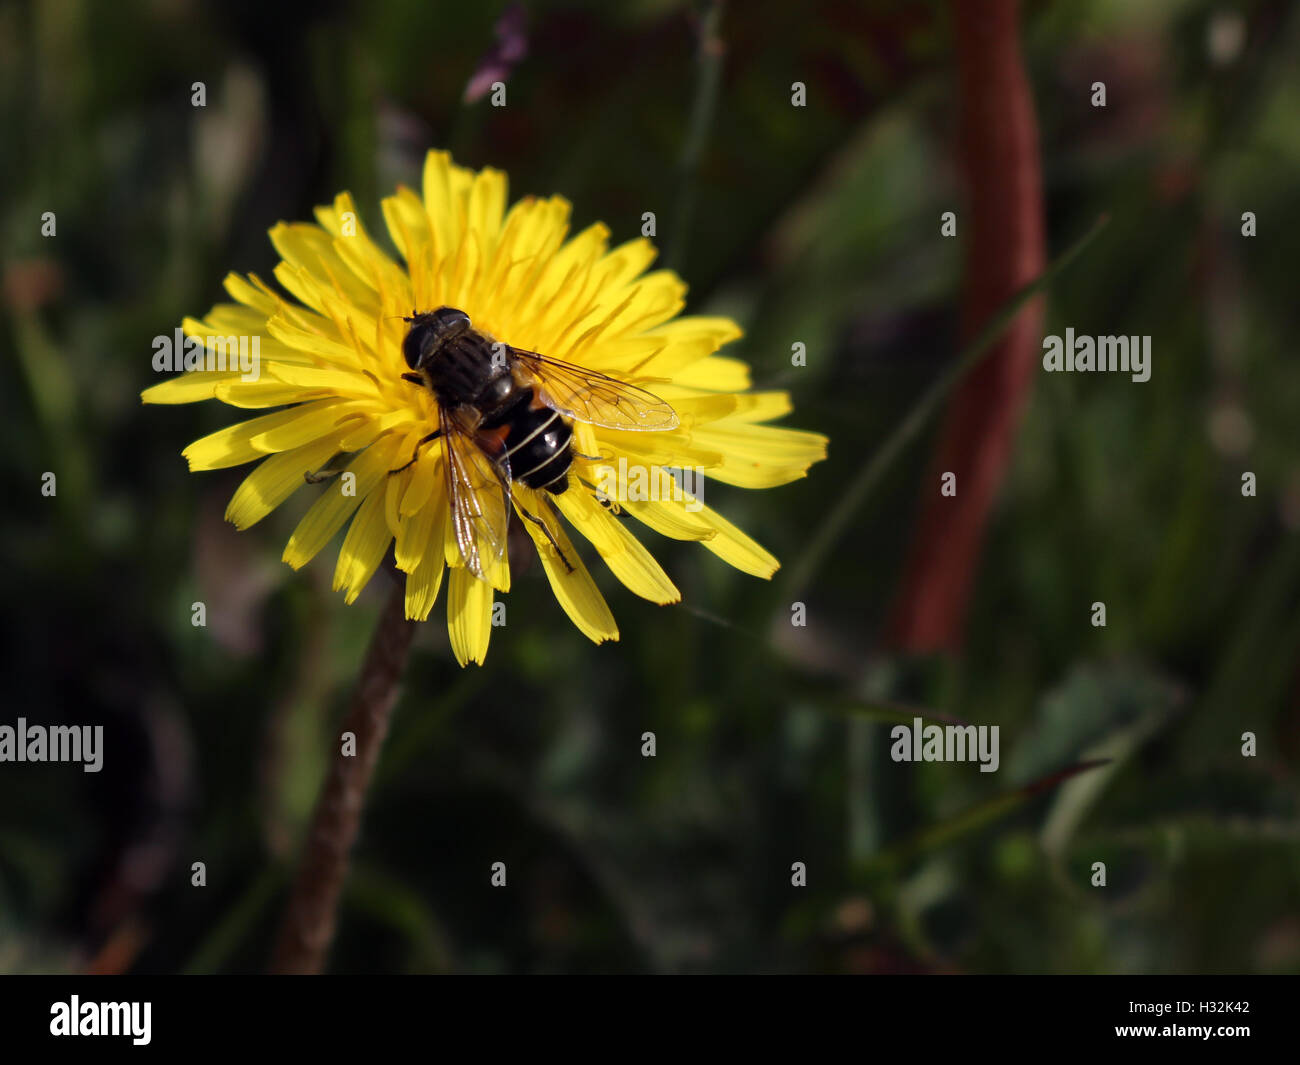 Leafcutter bee (Megachile sp) sitting in a yellow dandelion family flower (Hypochaeris sp) Stock Photo